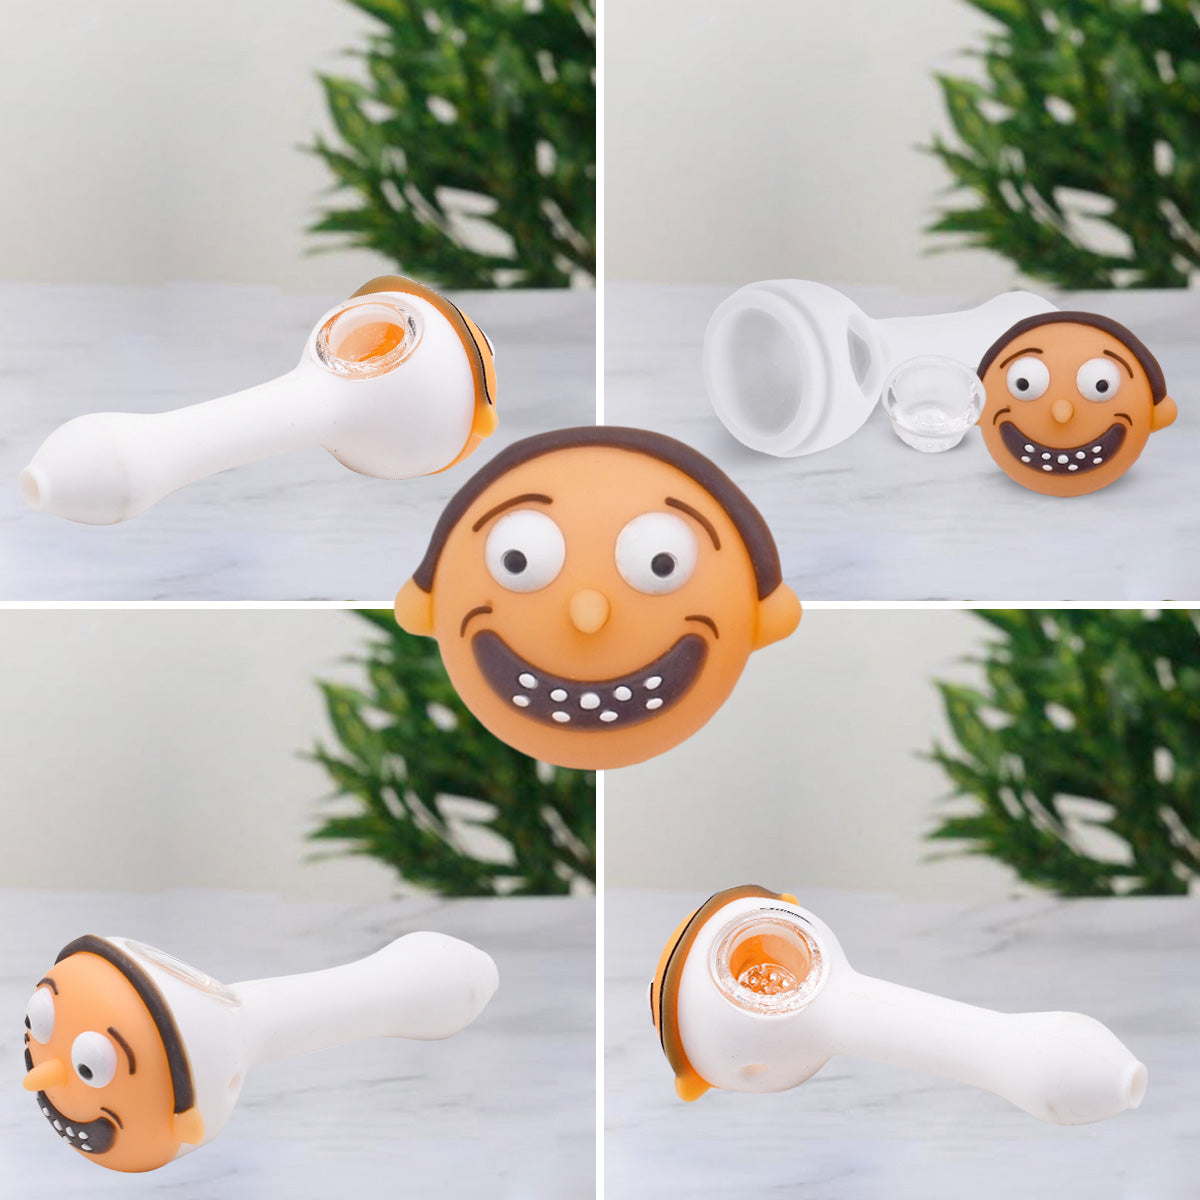 Silicone Smoking Pipe, Unbreakable with Glass Bowl, Rick and Morty, Orange